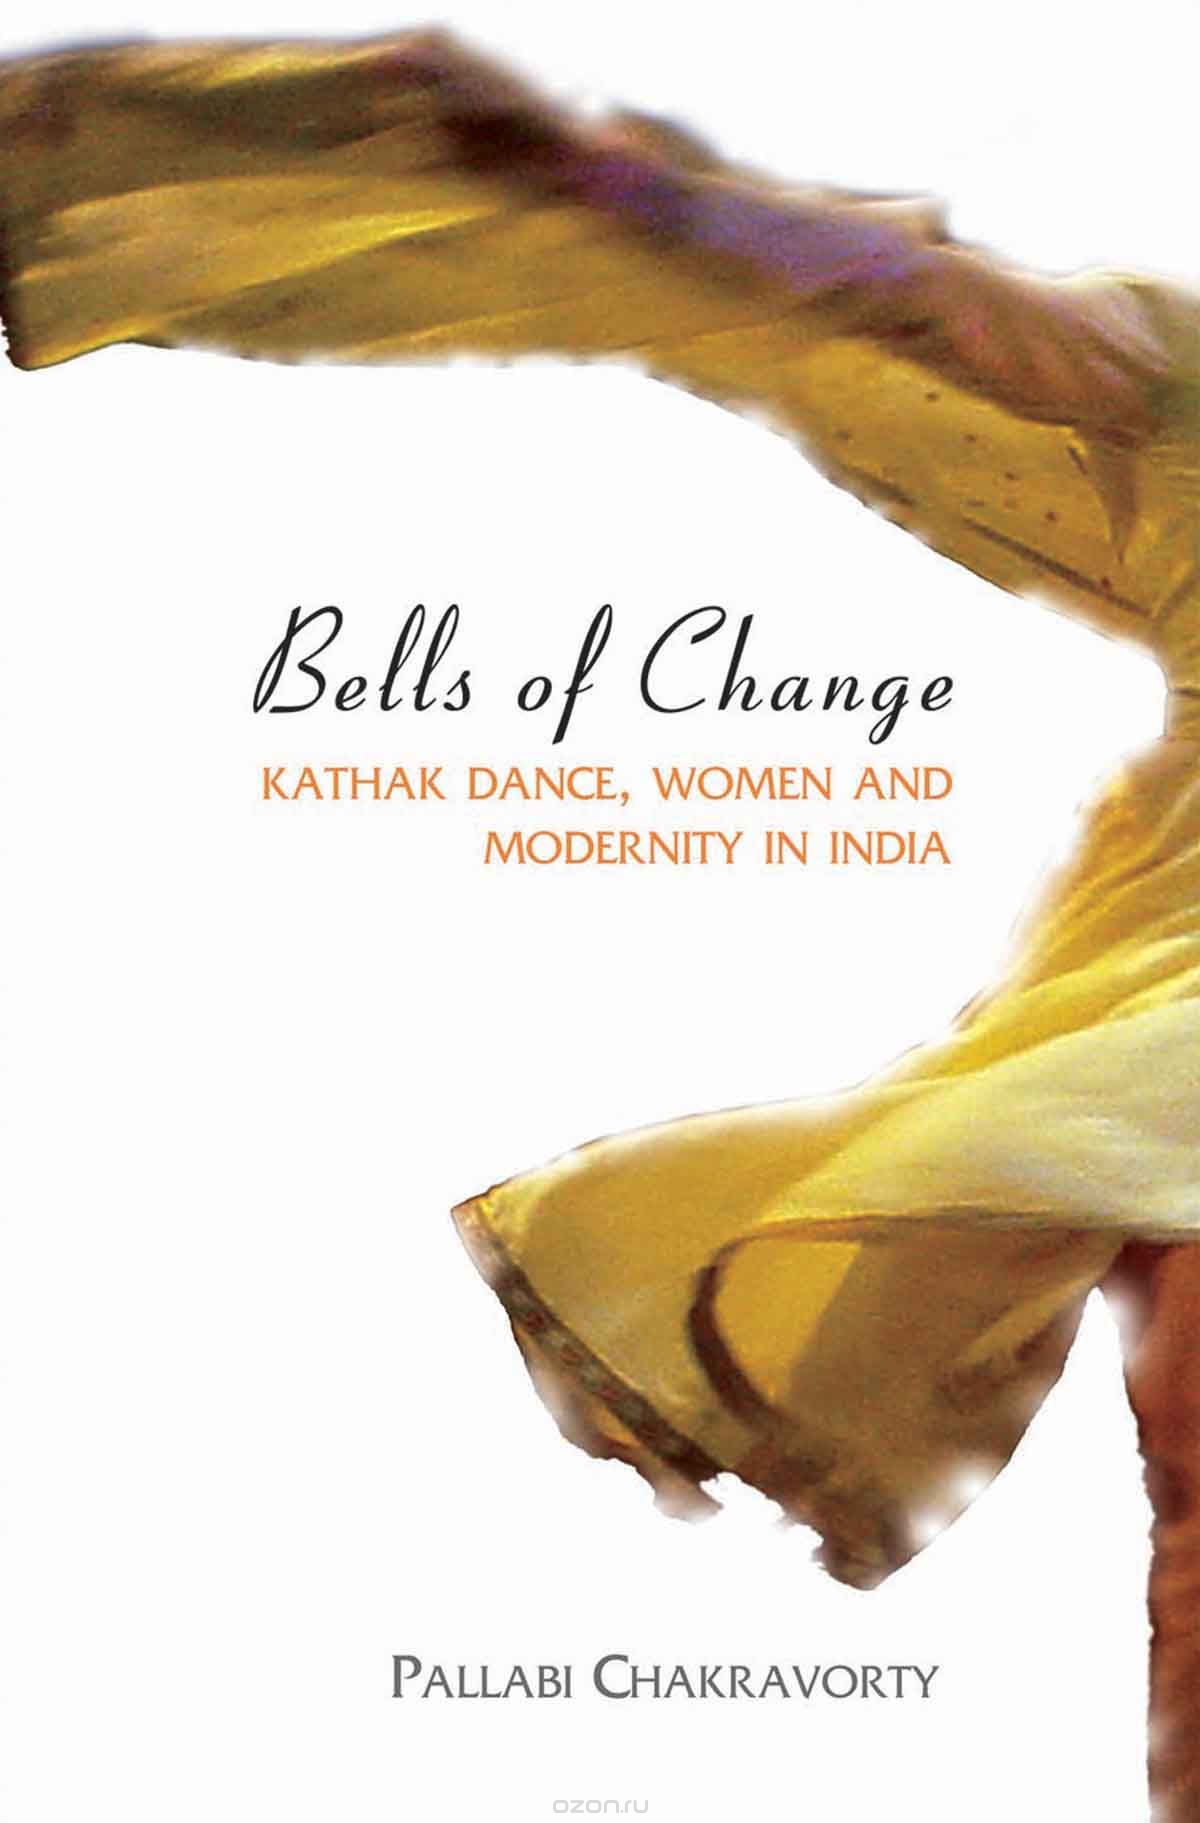 Bells of Change – Kathak Dance, Women and Modernity In India